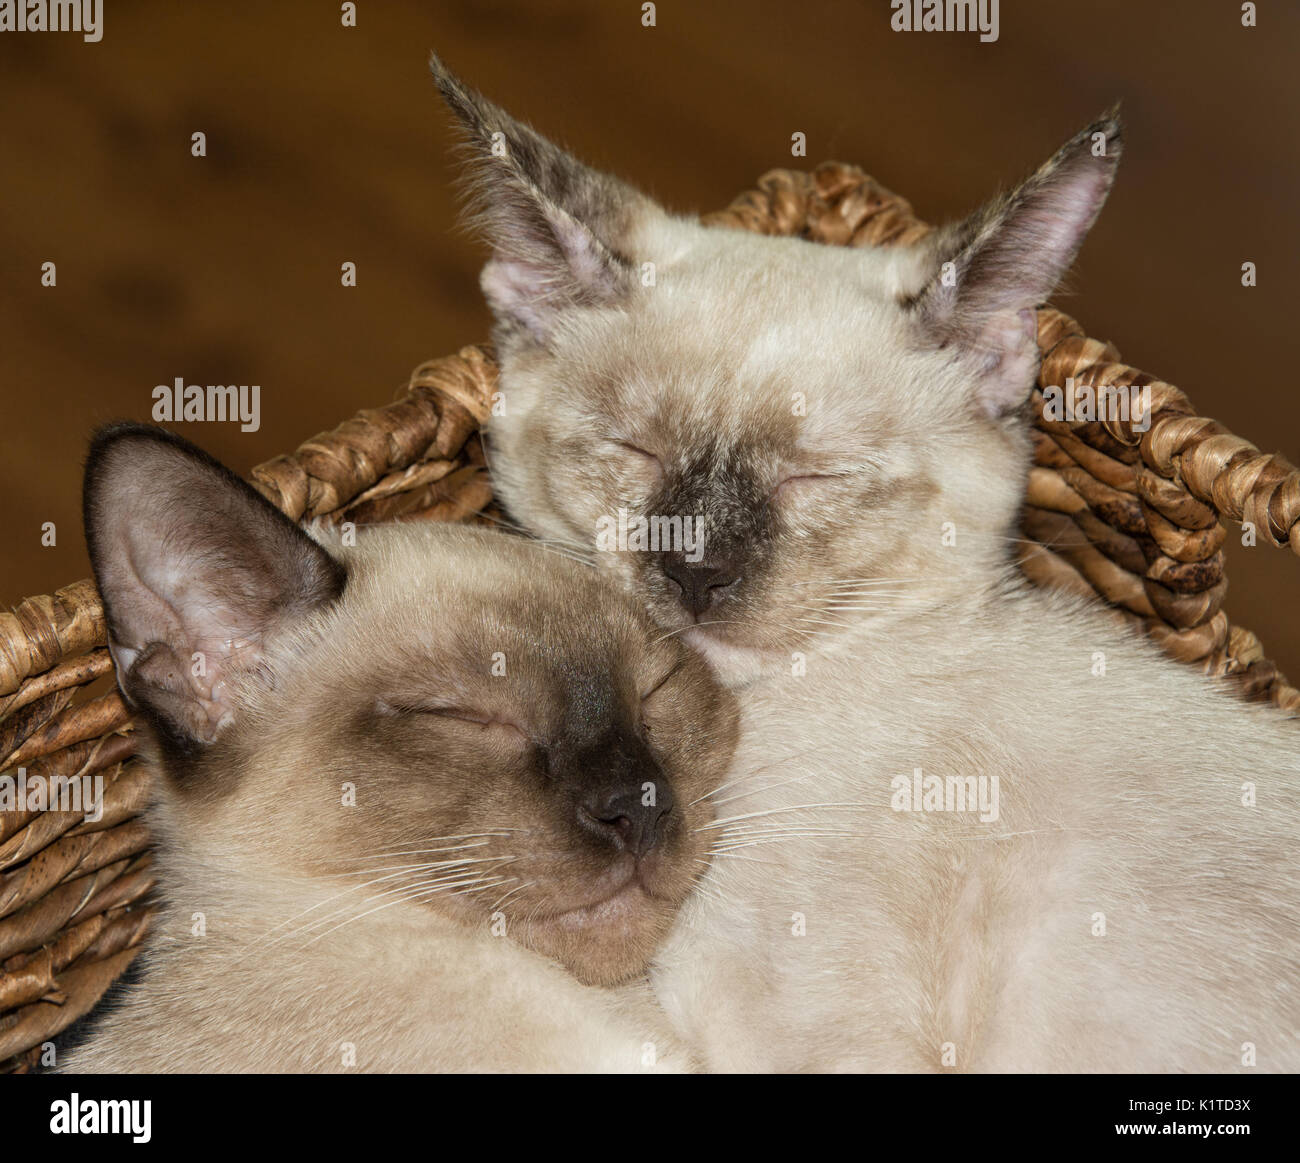 Closeup of two Siamese kittens snuggling up, asleep, in a brown basket Stock Photo